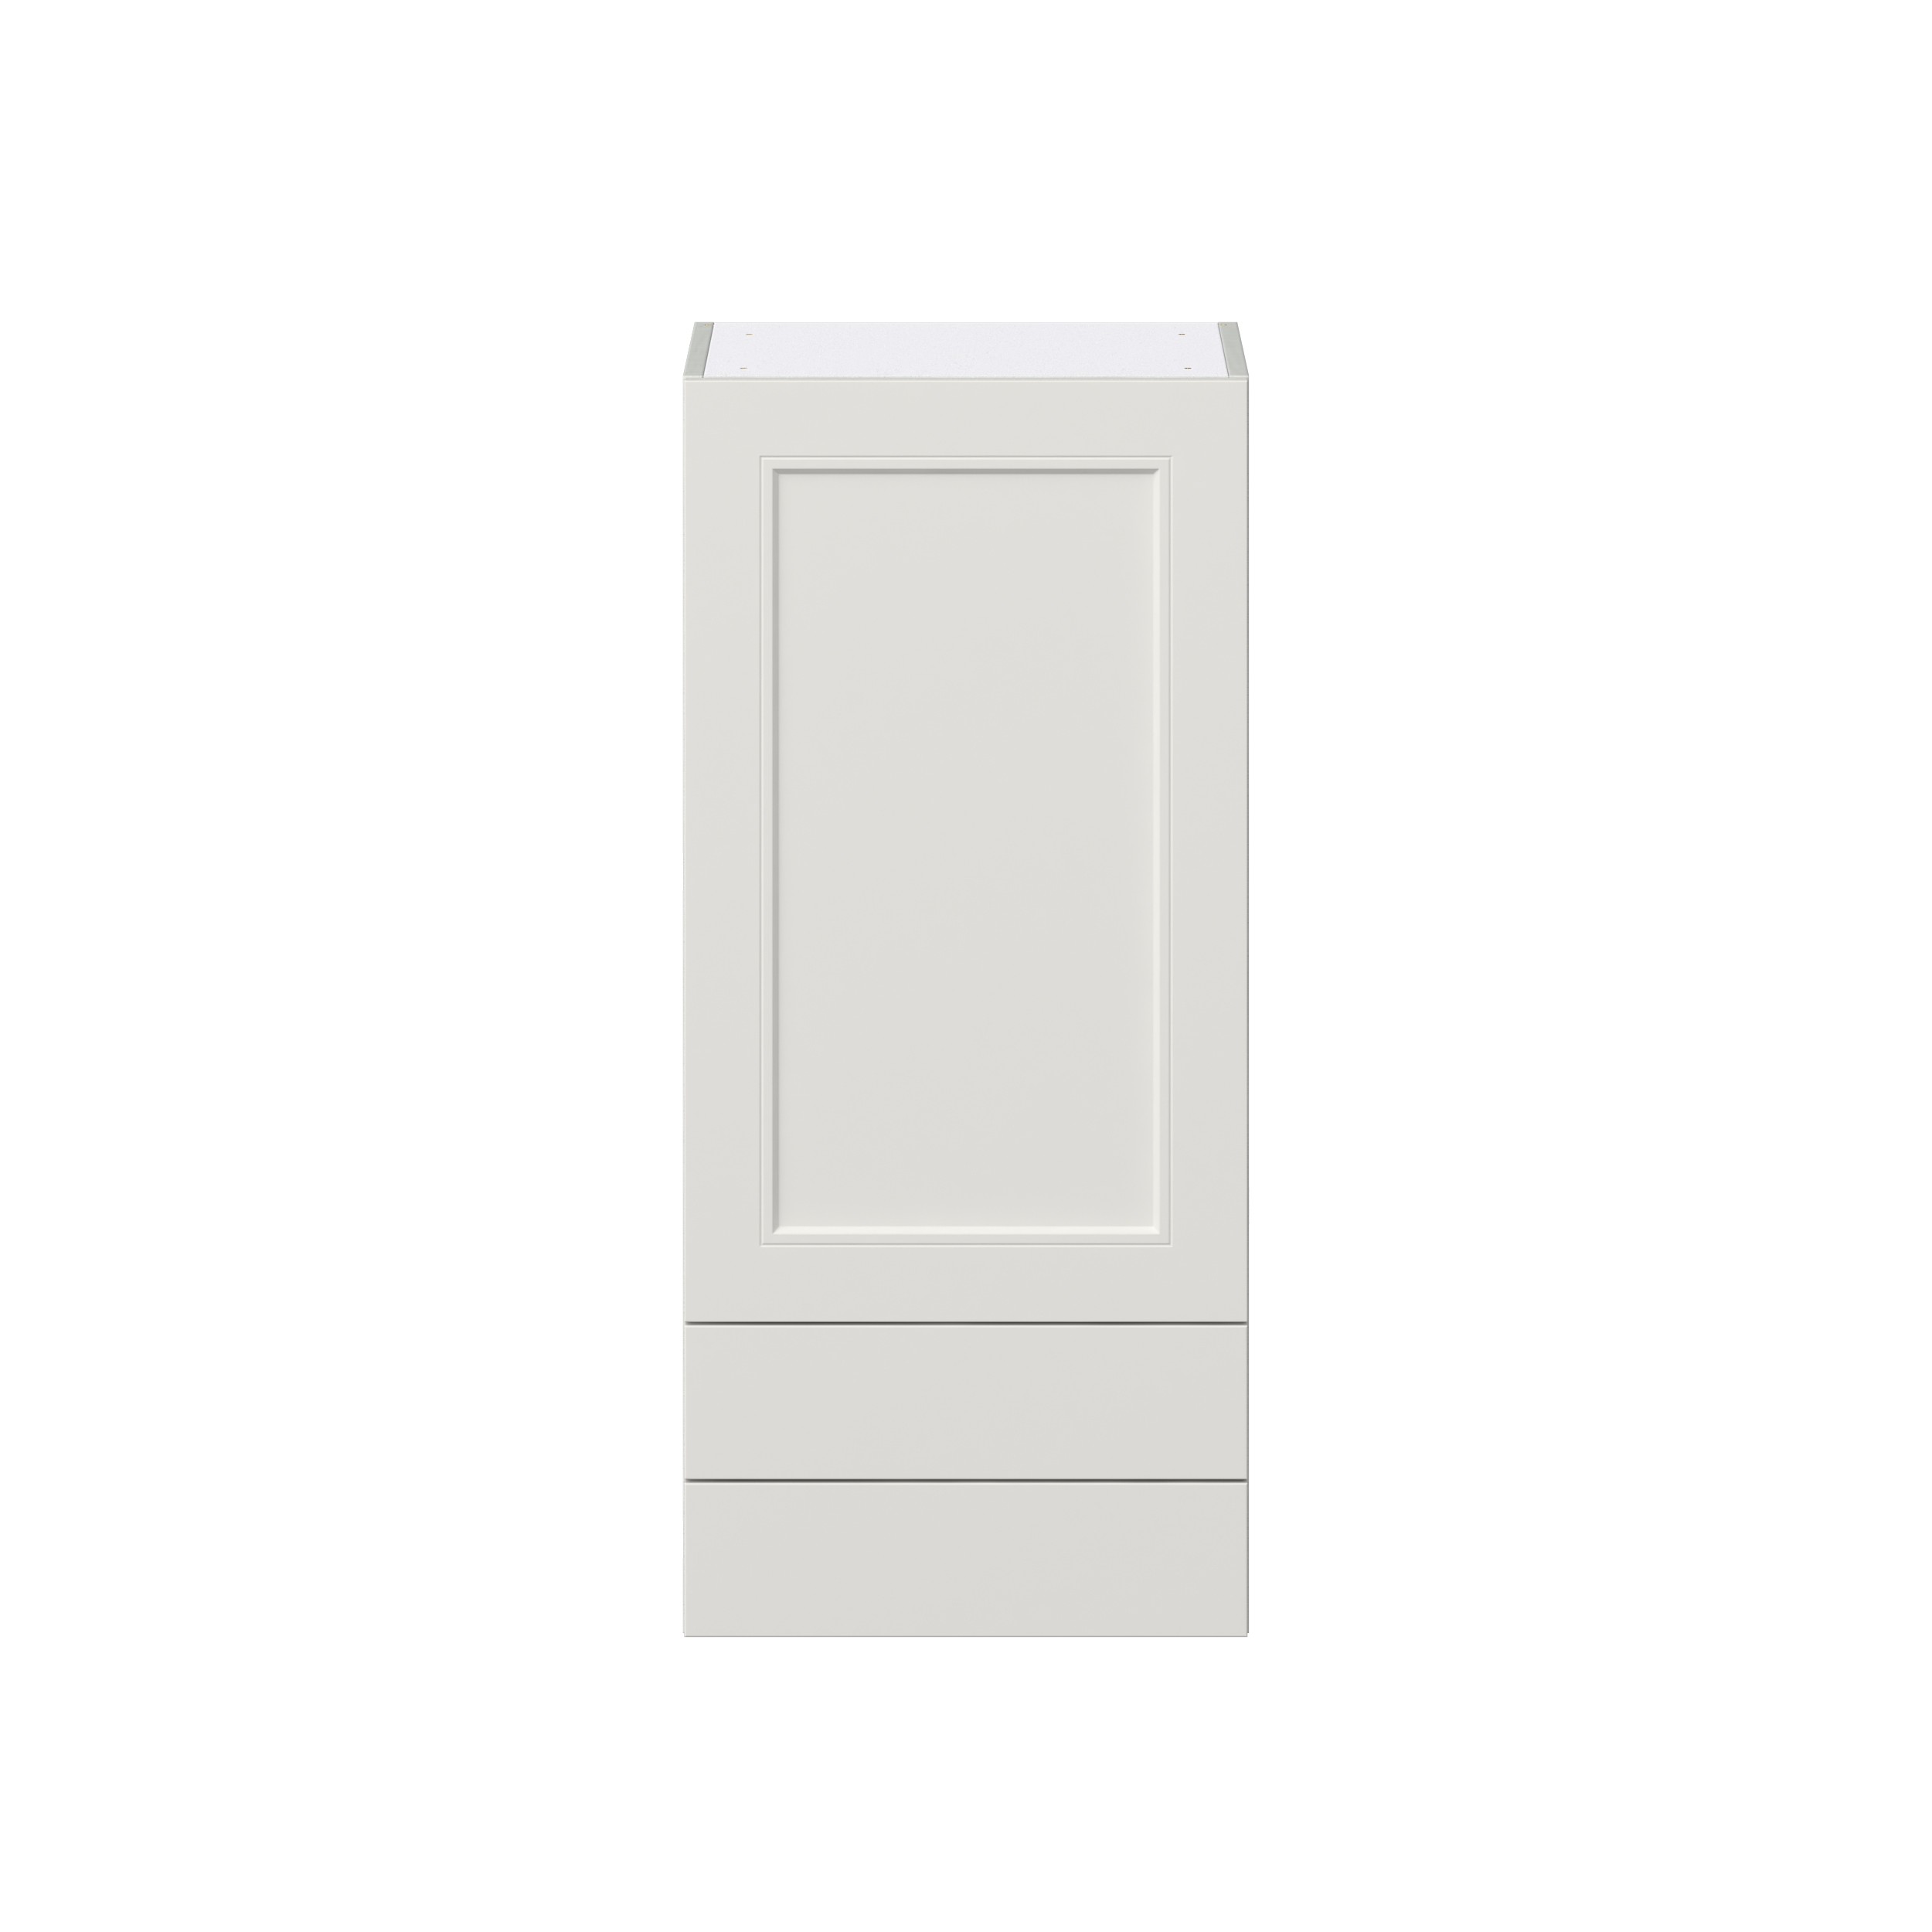 Wisteria Painted Light Gray Recessed Assembled Wall Cabinet with a Door and Two 5 in. Drawers (18 in. W x 40 in. H x 14 in. D)